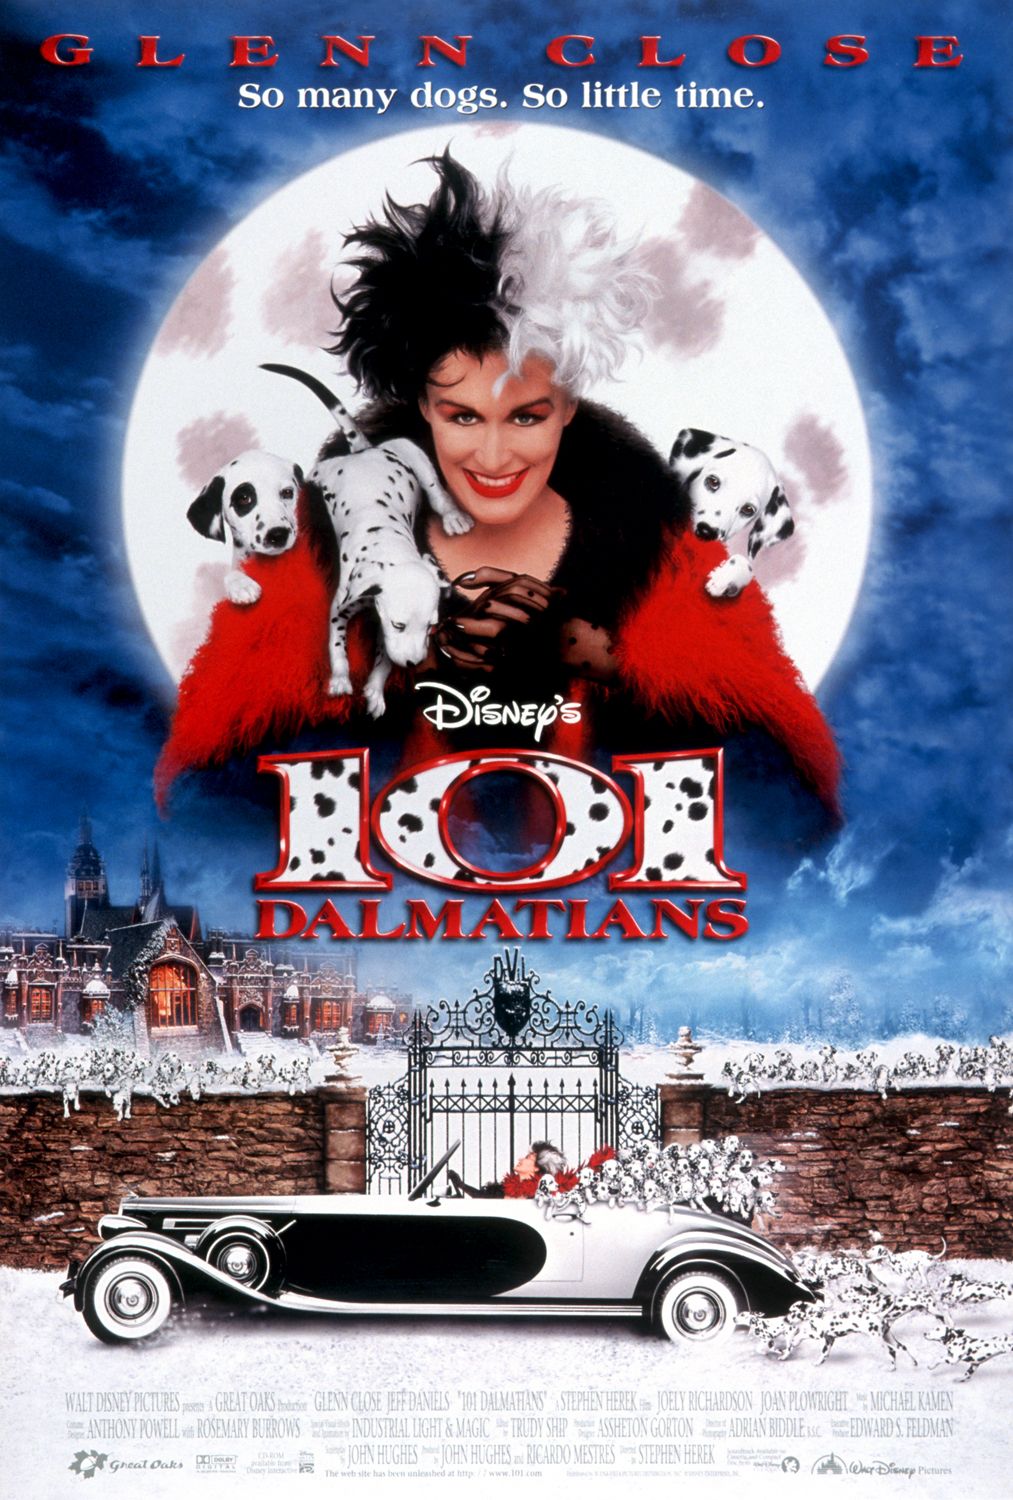 One Hundred and One Dalmatians movie